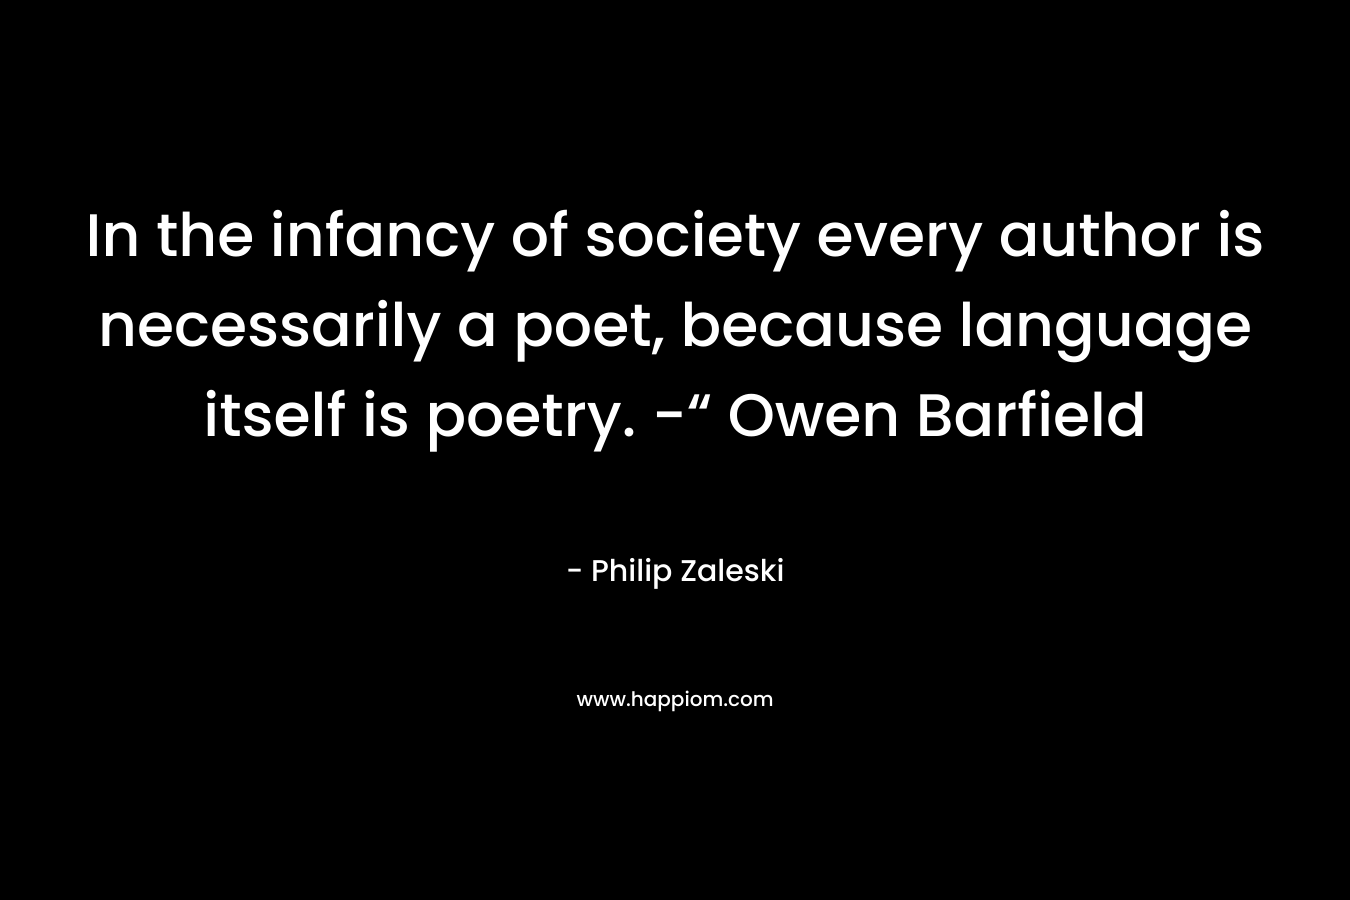 In the infancy of society every author is necessarily a poet, because language itself is poetry. -“ Owen Barfield – Philip Zaleski